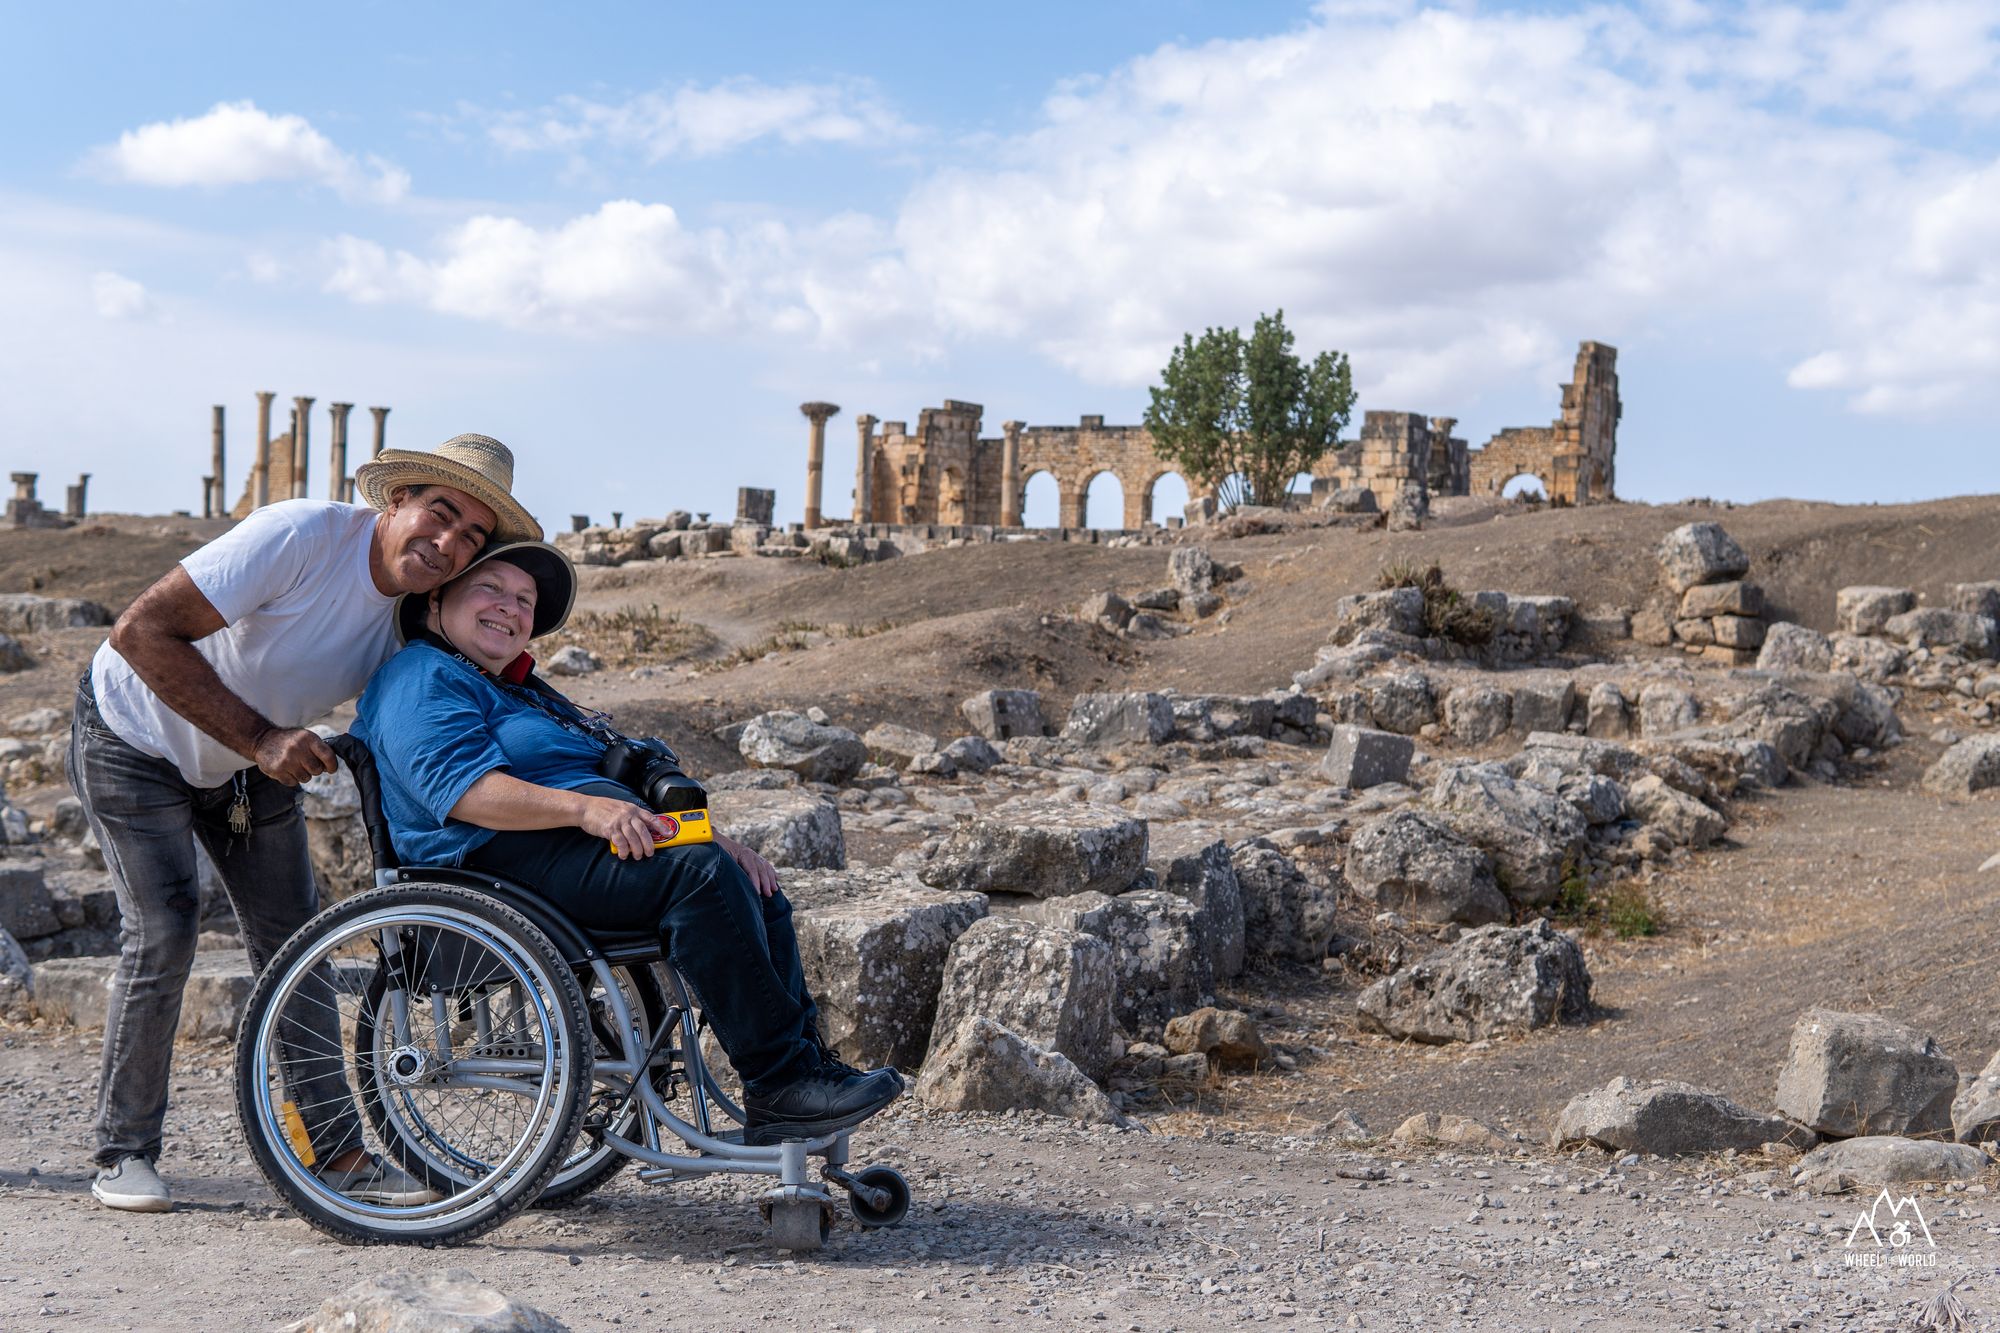 A wheelchair user being helped through the gravel trail in Morocco. A good representation of celebrating disability pride month.